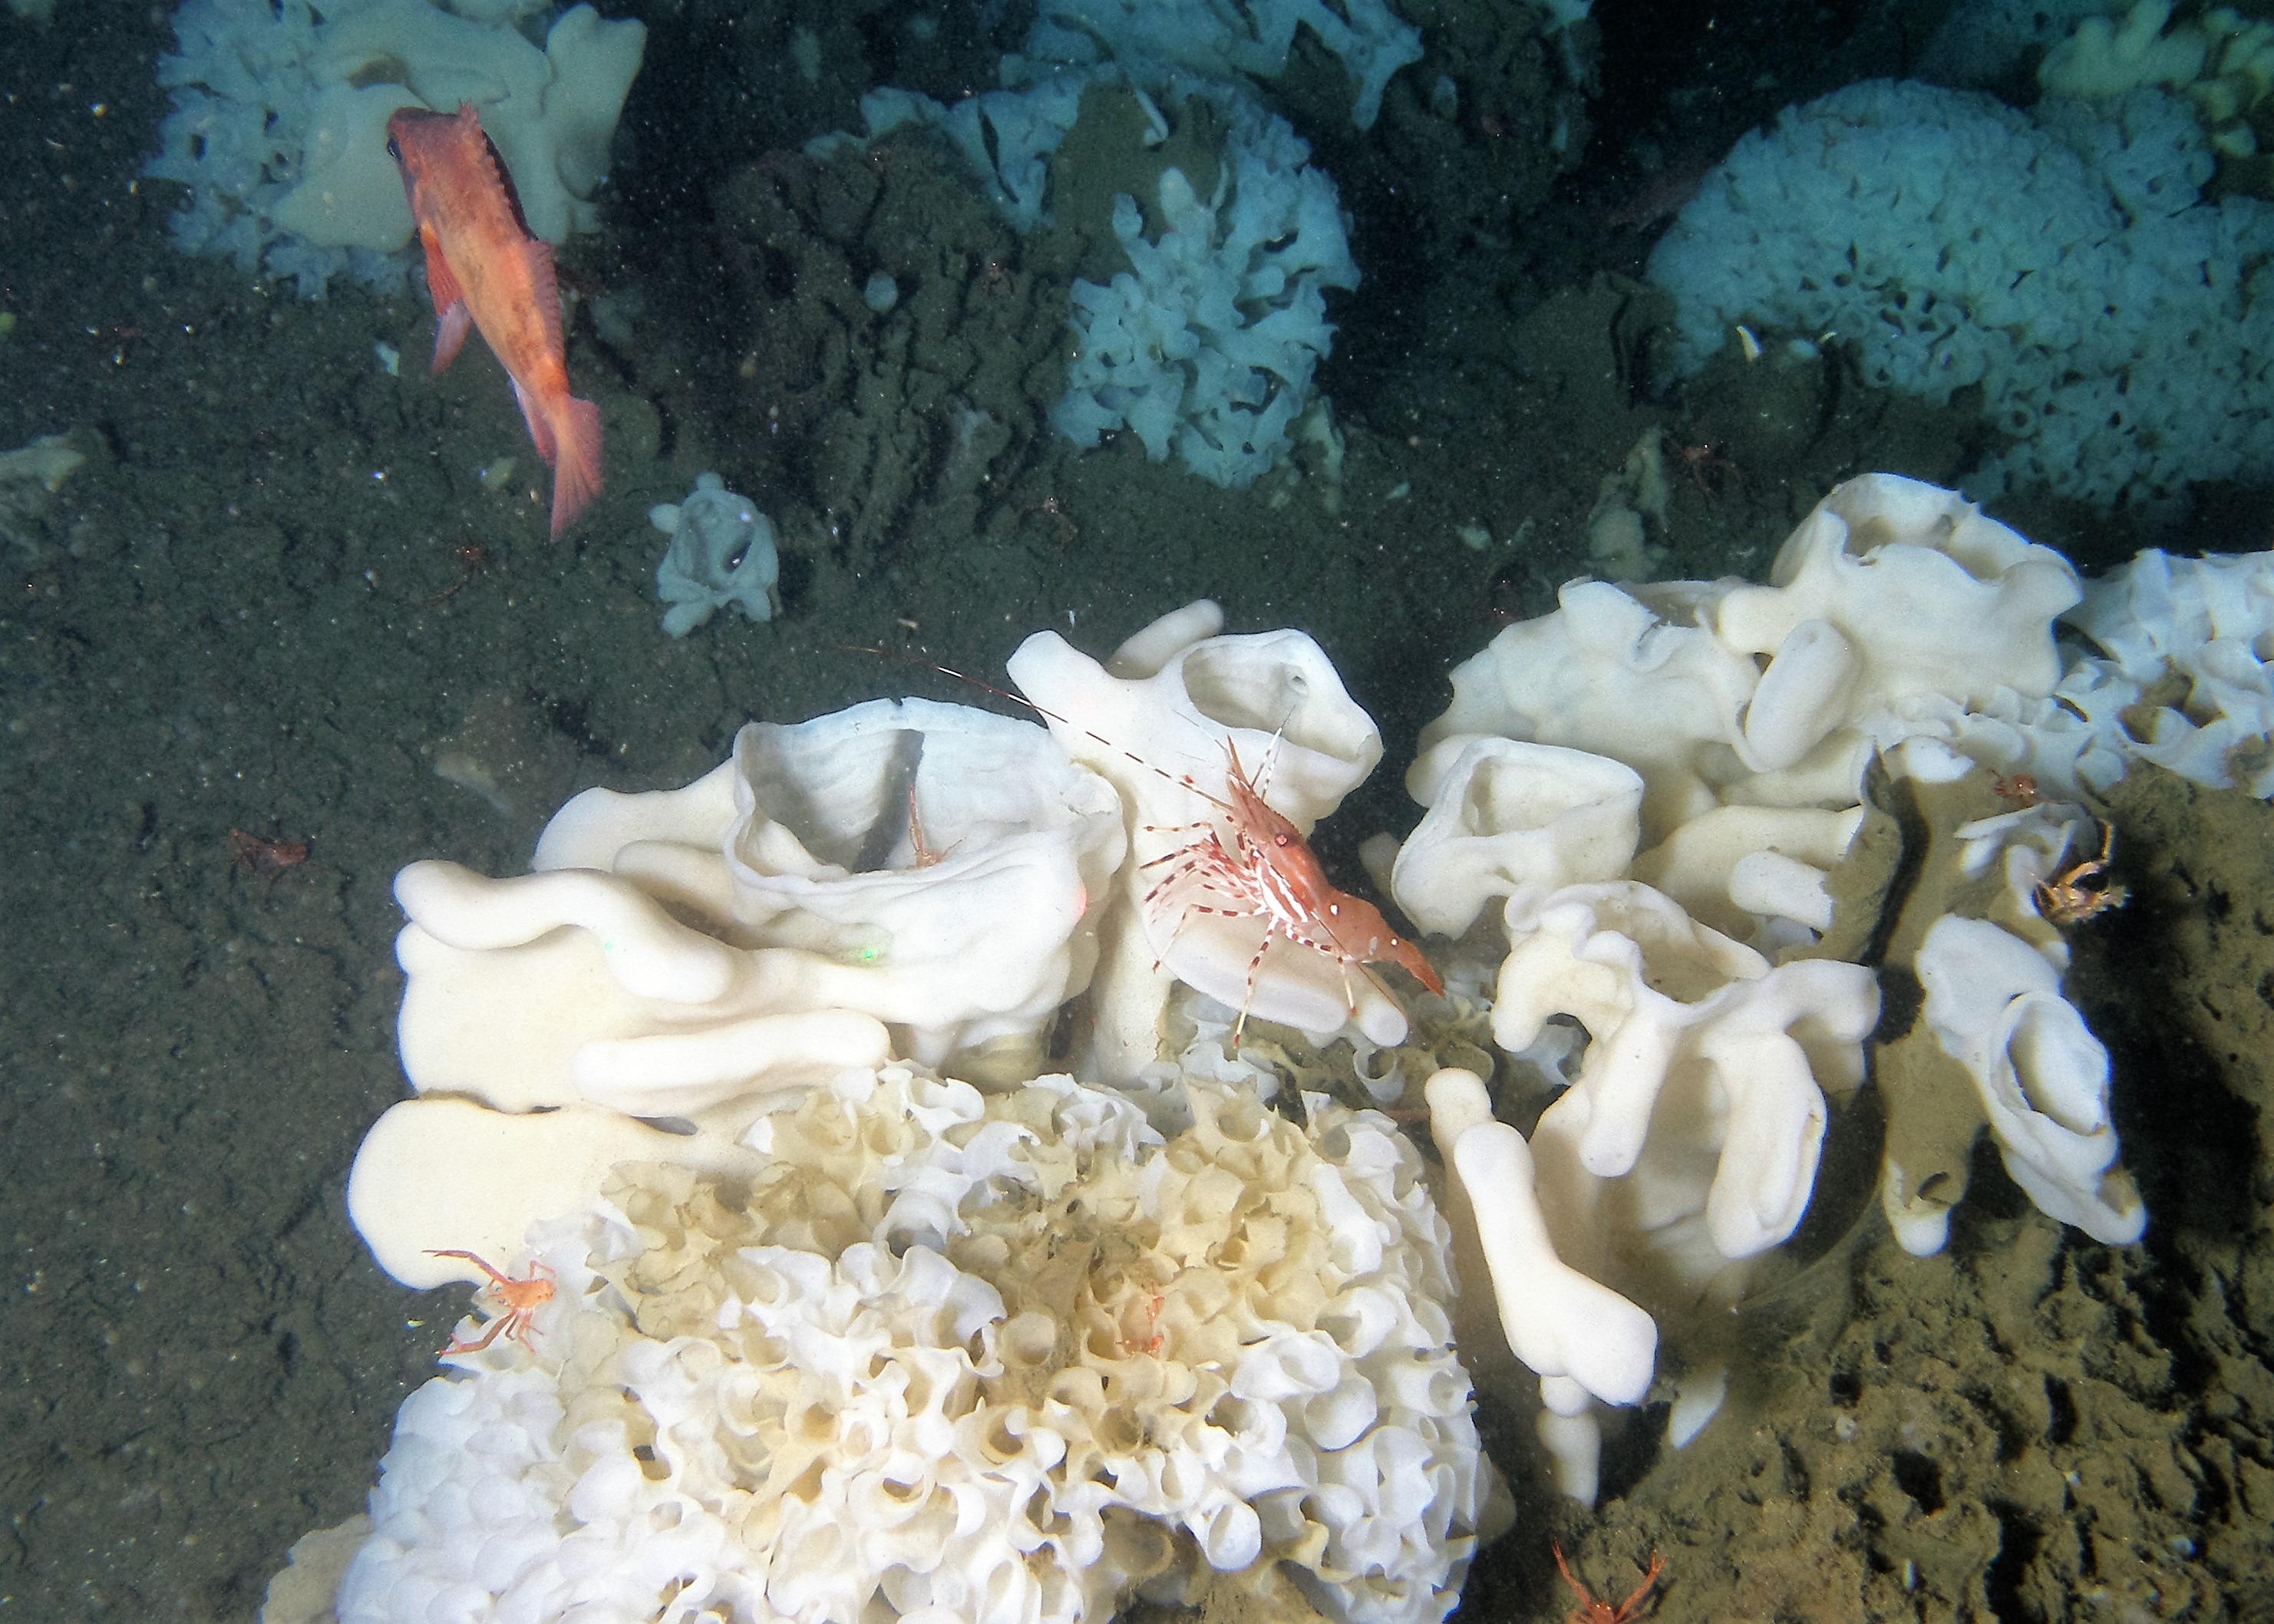 Many fish species find food and shelter on glass sponge reefs. Photo courtesy: Department of Fisheries and Oceans Canada (DFO)